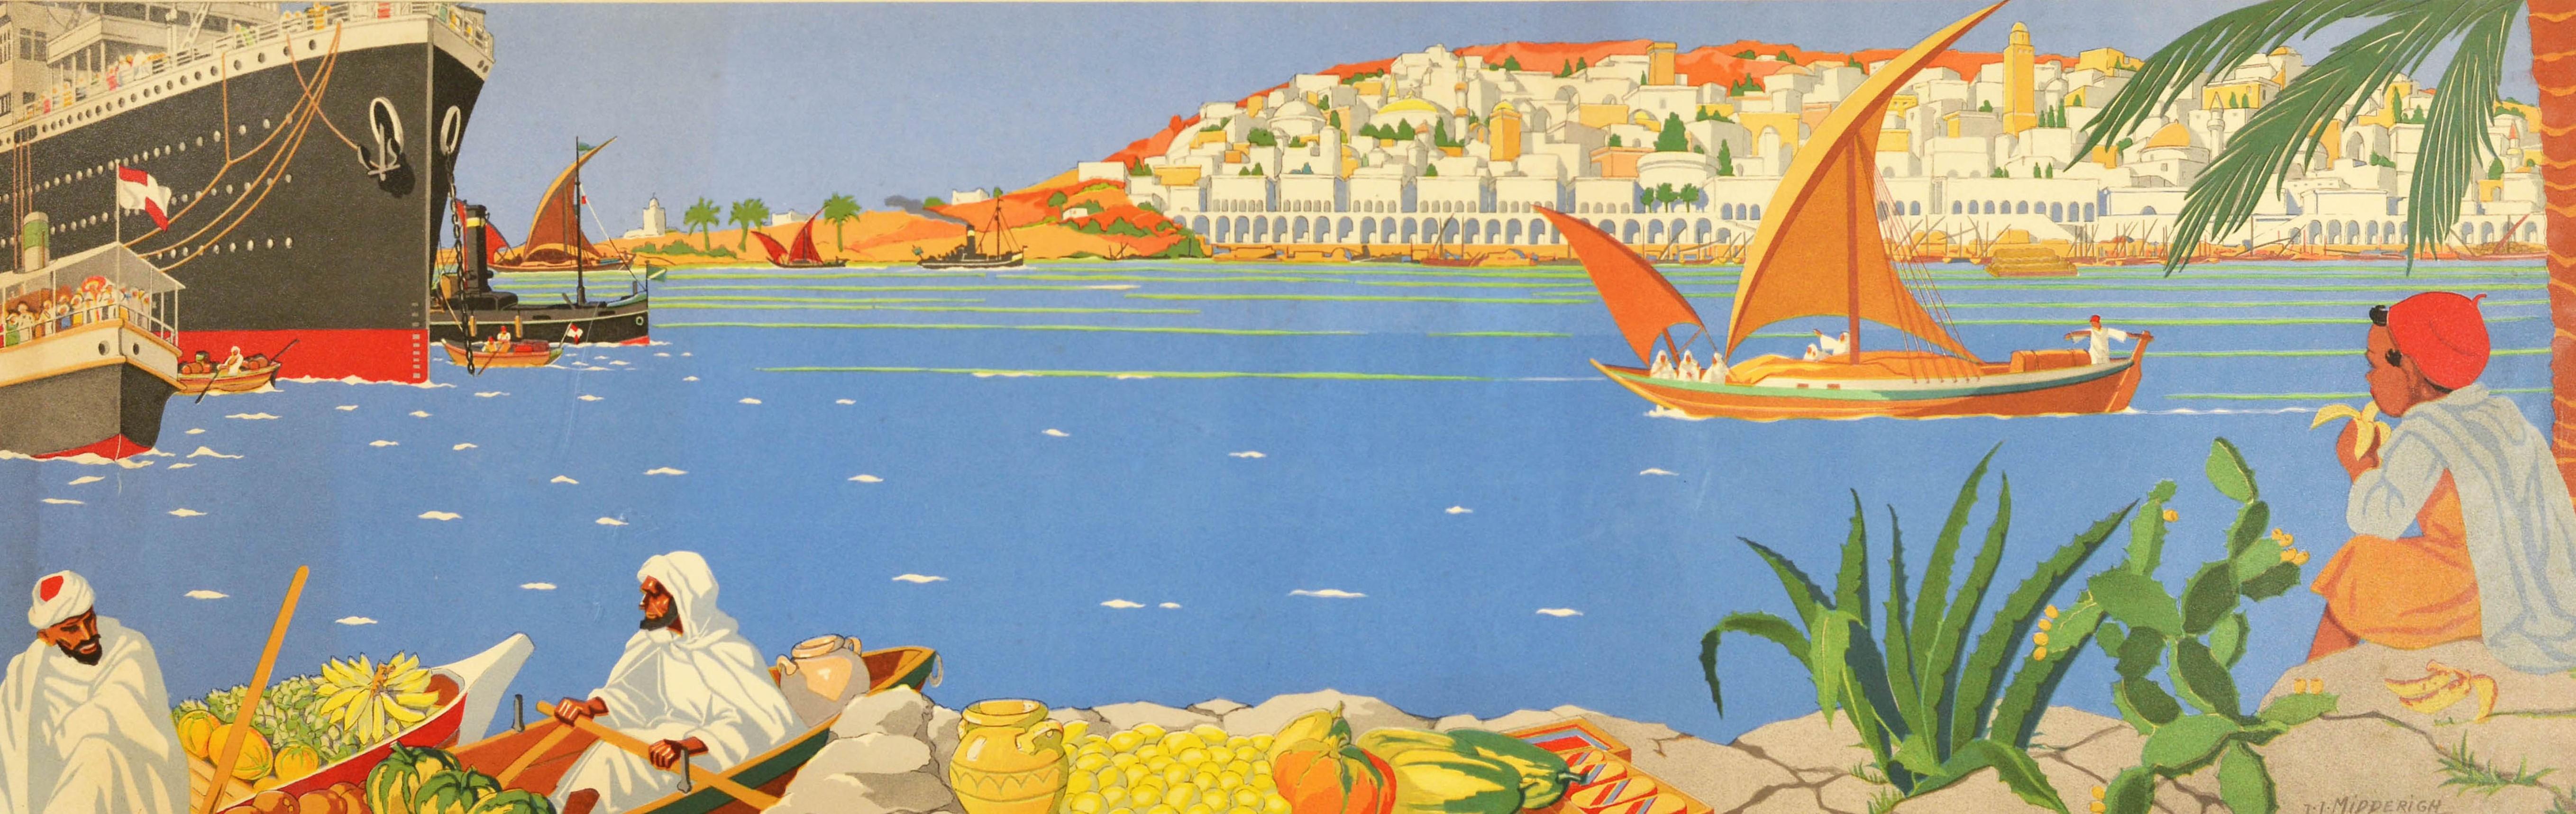 Original vintage travel poster featuring a colourful scenic artwork titled In The Near East painted by Jean Jacques Midderigh (1877-1970) showing men in rowing boats laden with tropical fruit and a boy sitting on rocks eating a banana under a palm